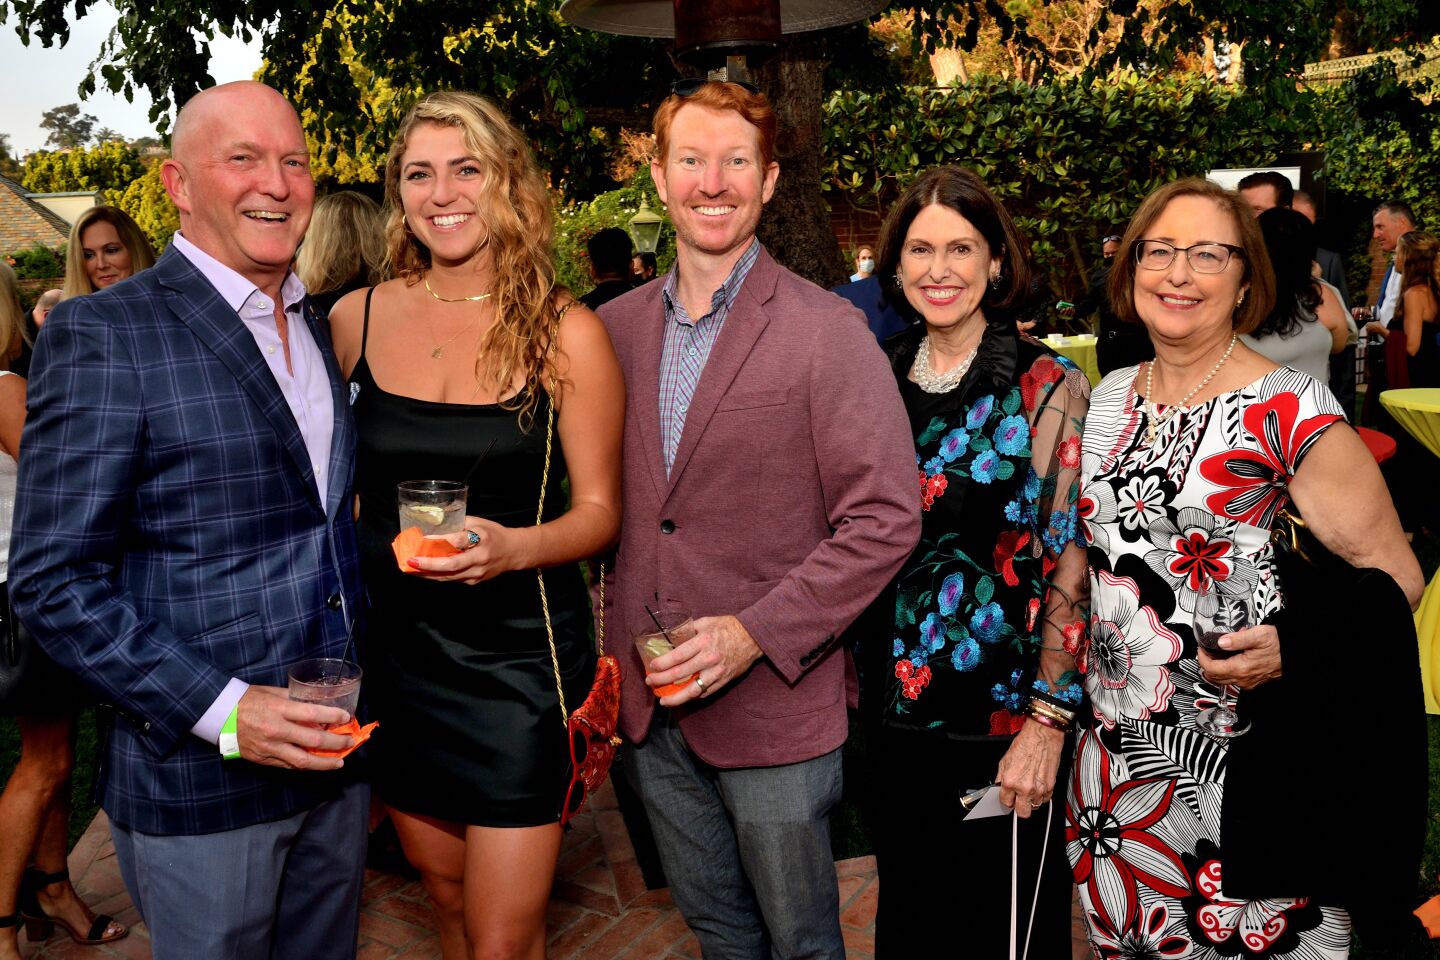 Jay and Morgan Wurtzler, Brett Hassig, Ann Hill and Promises2Kids founder emeritus Renee Comeau